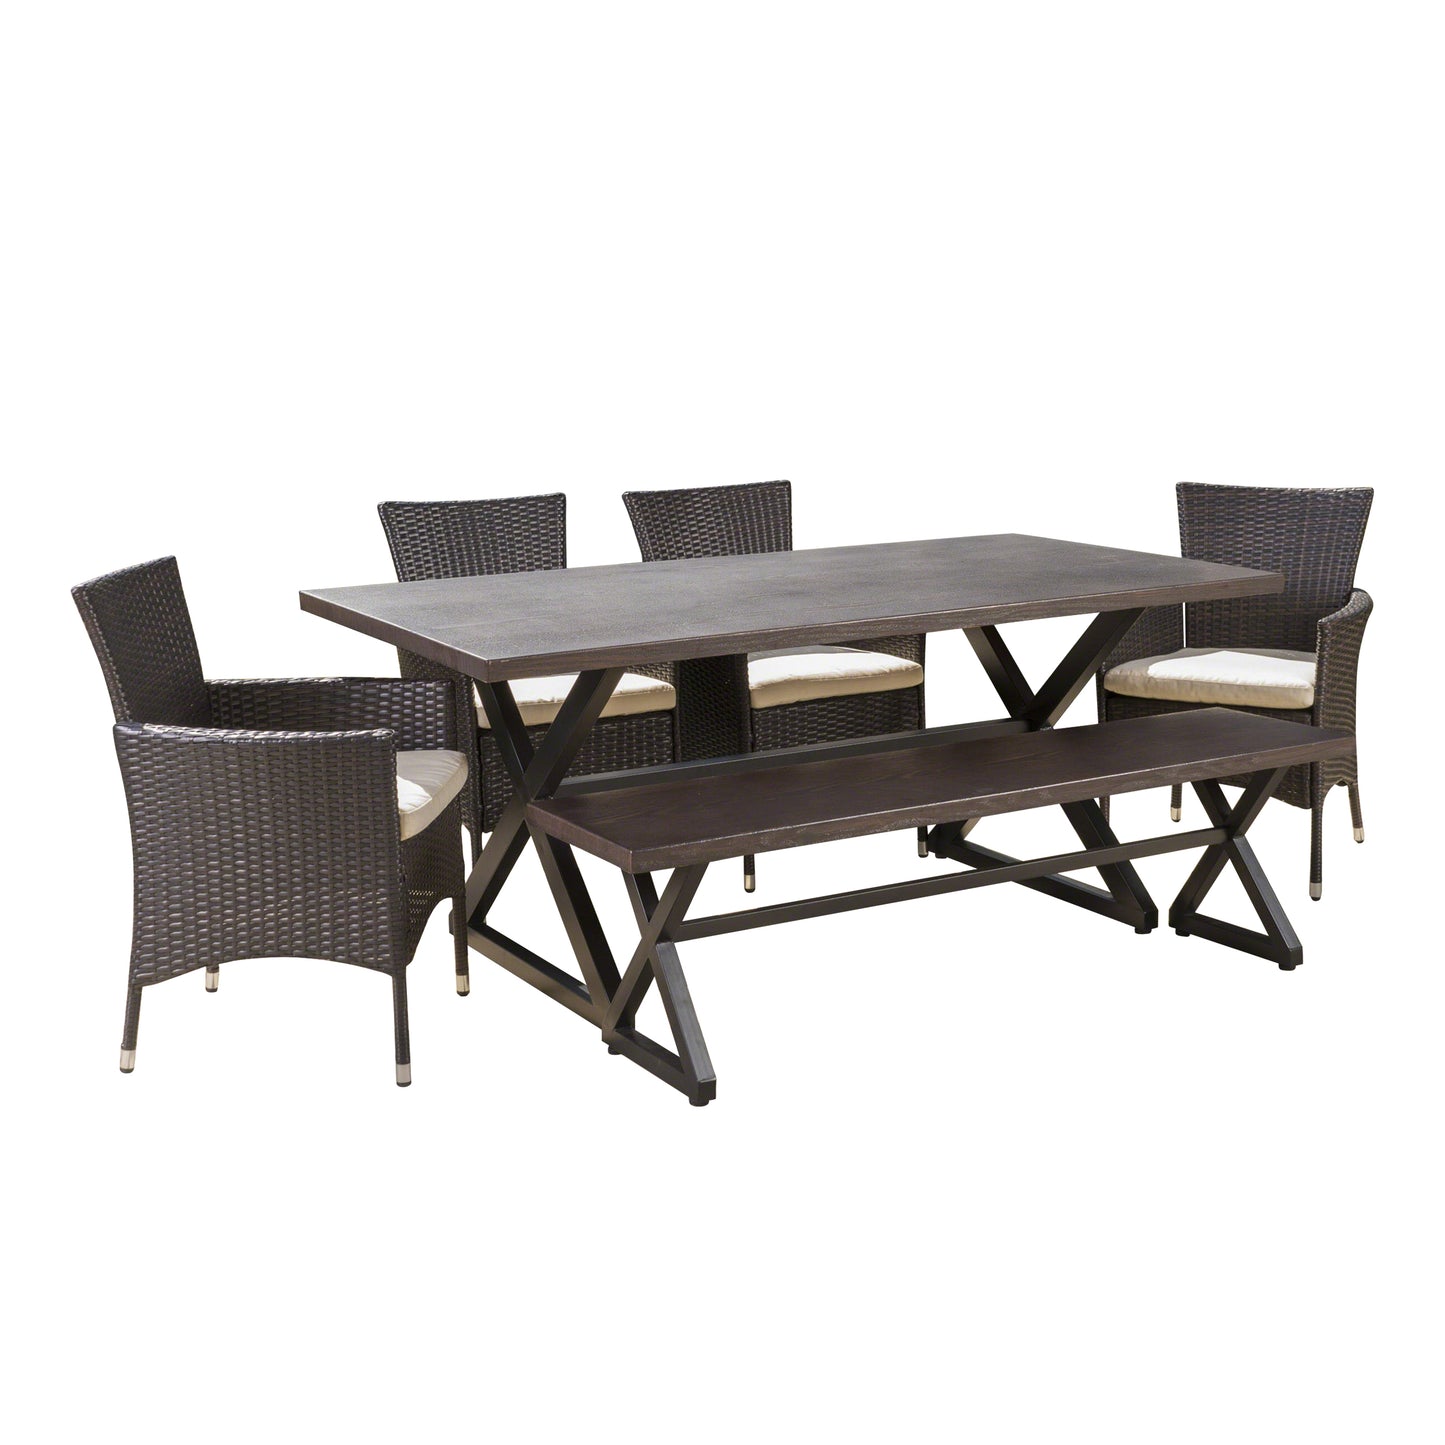 Owenburg Outdoor 6 Piece Aluminum Dining Set with Bench and Wicker Dining Chairs